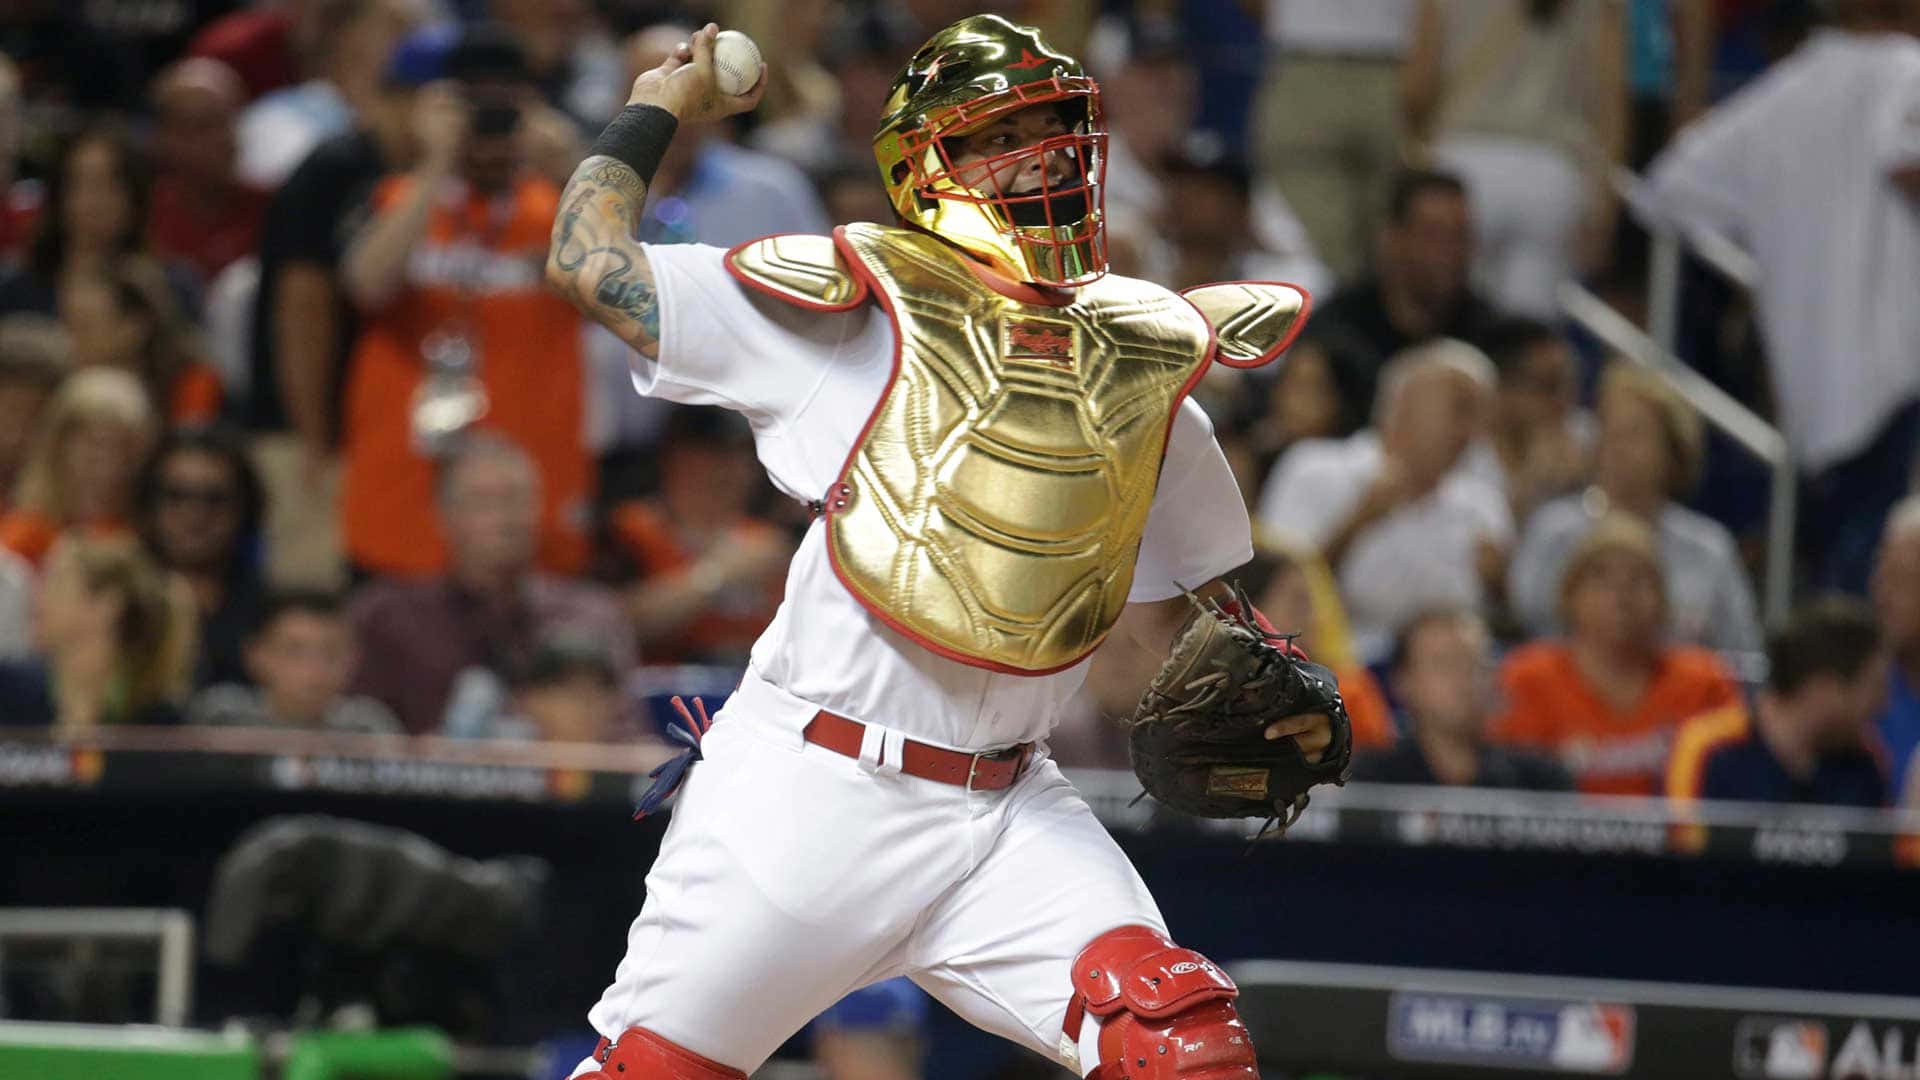 The Best Sports Wallpapers Yadier Molina Catcher for the St